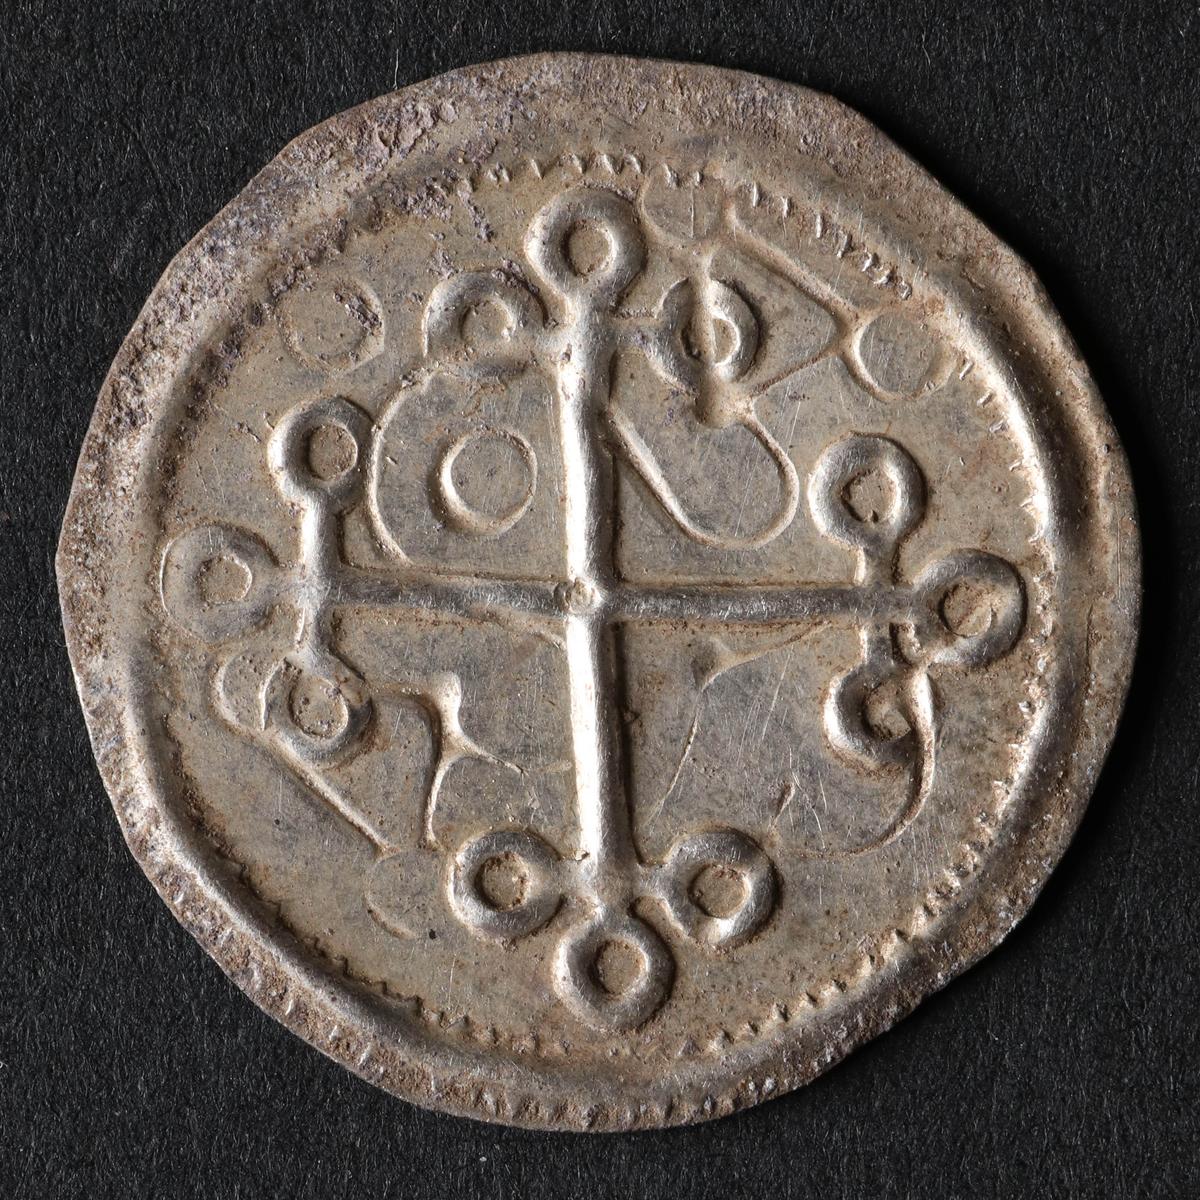 A well-preserved cross-bearing coin struck under Harald Blåtand at the end of the 10th century. (Photos from Nordjyske Museer, Denmark)